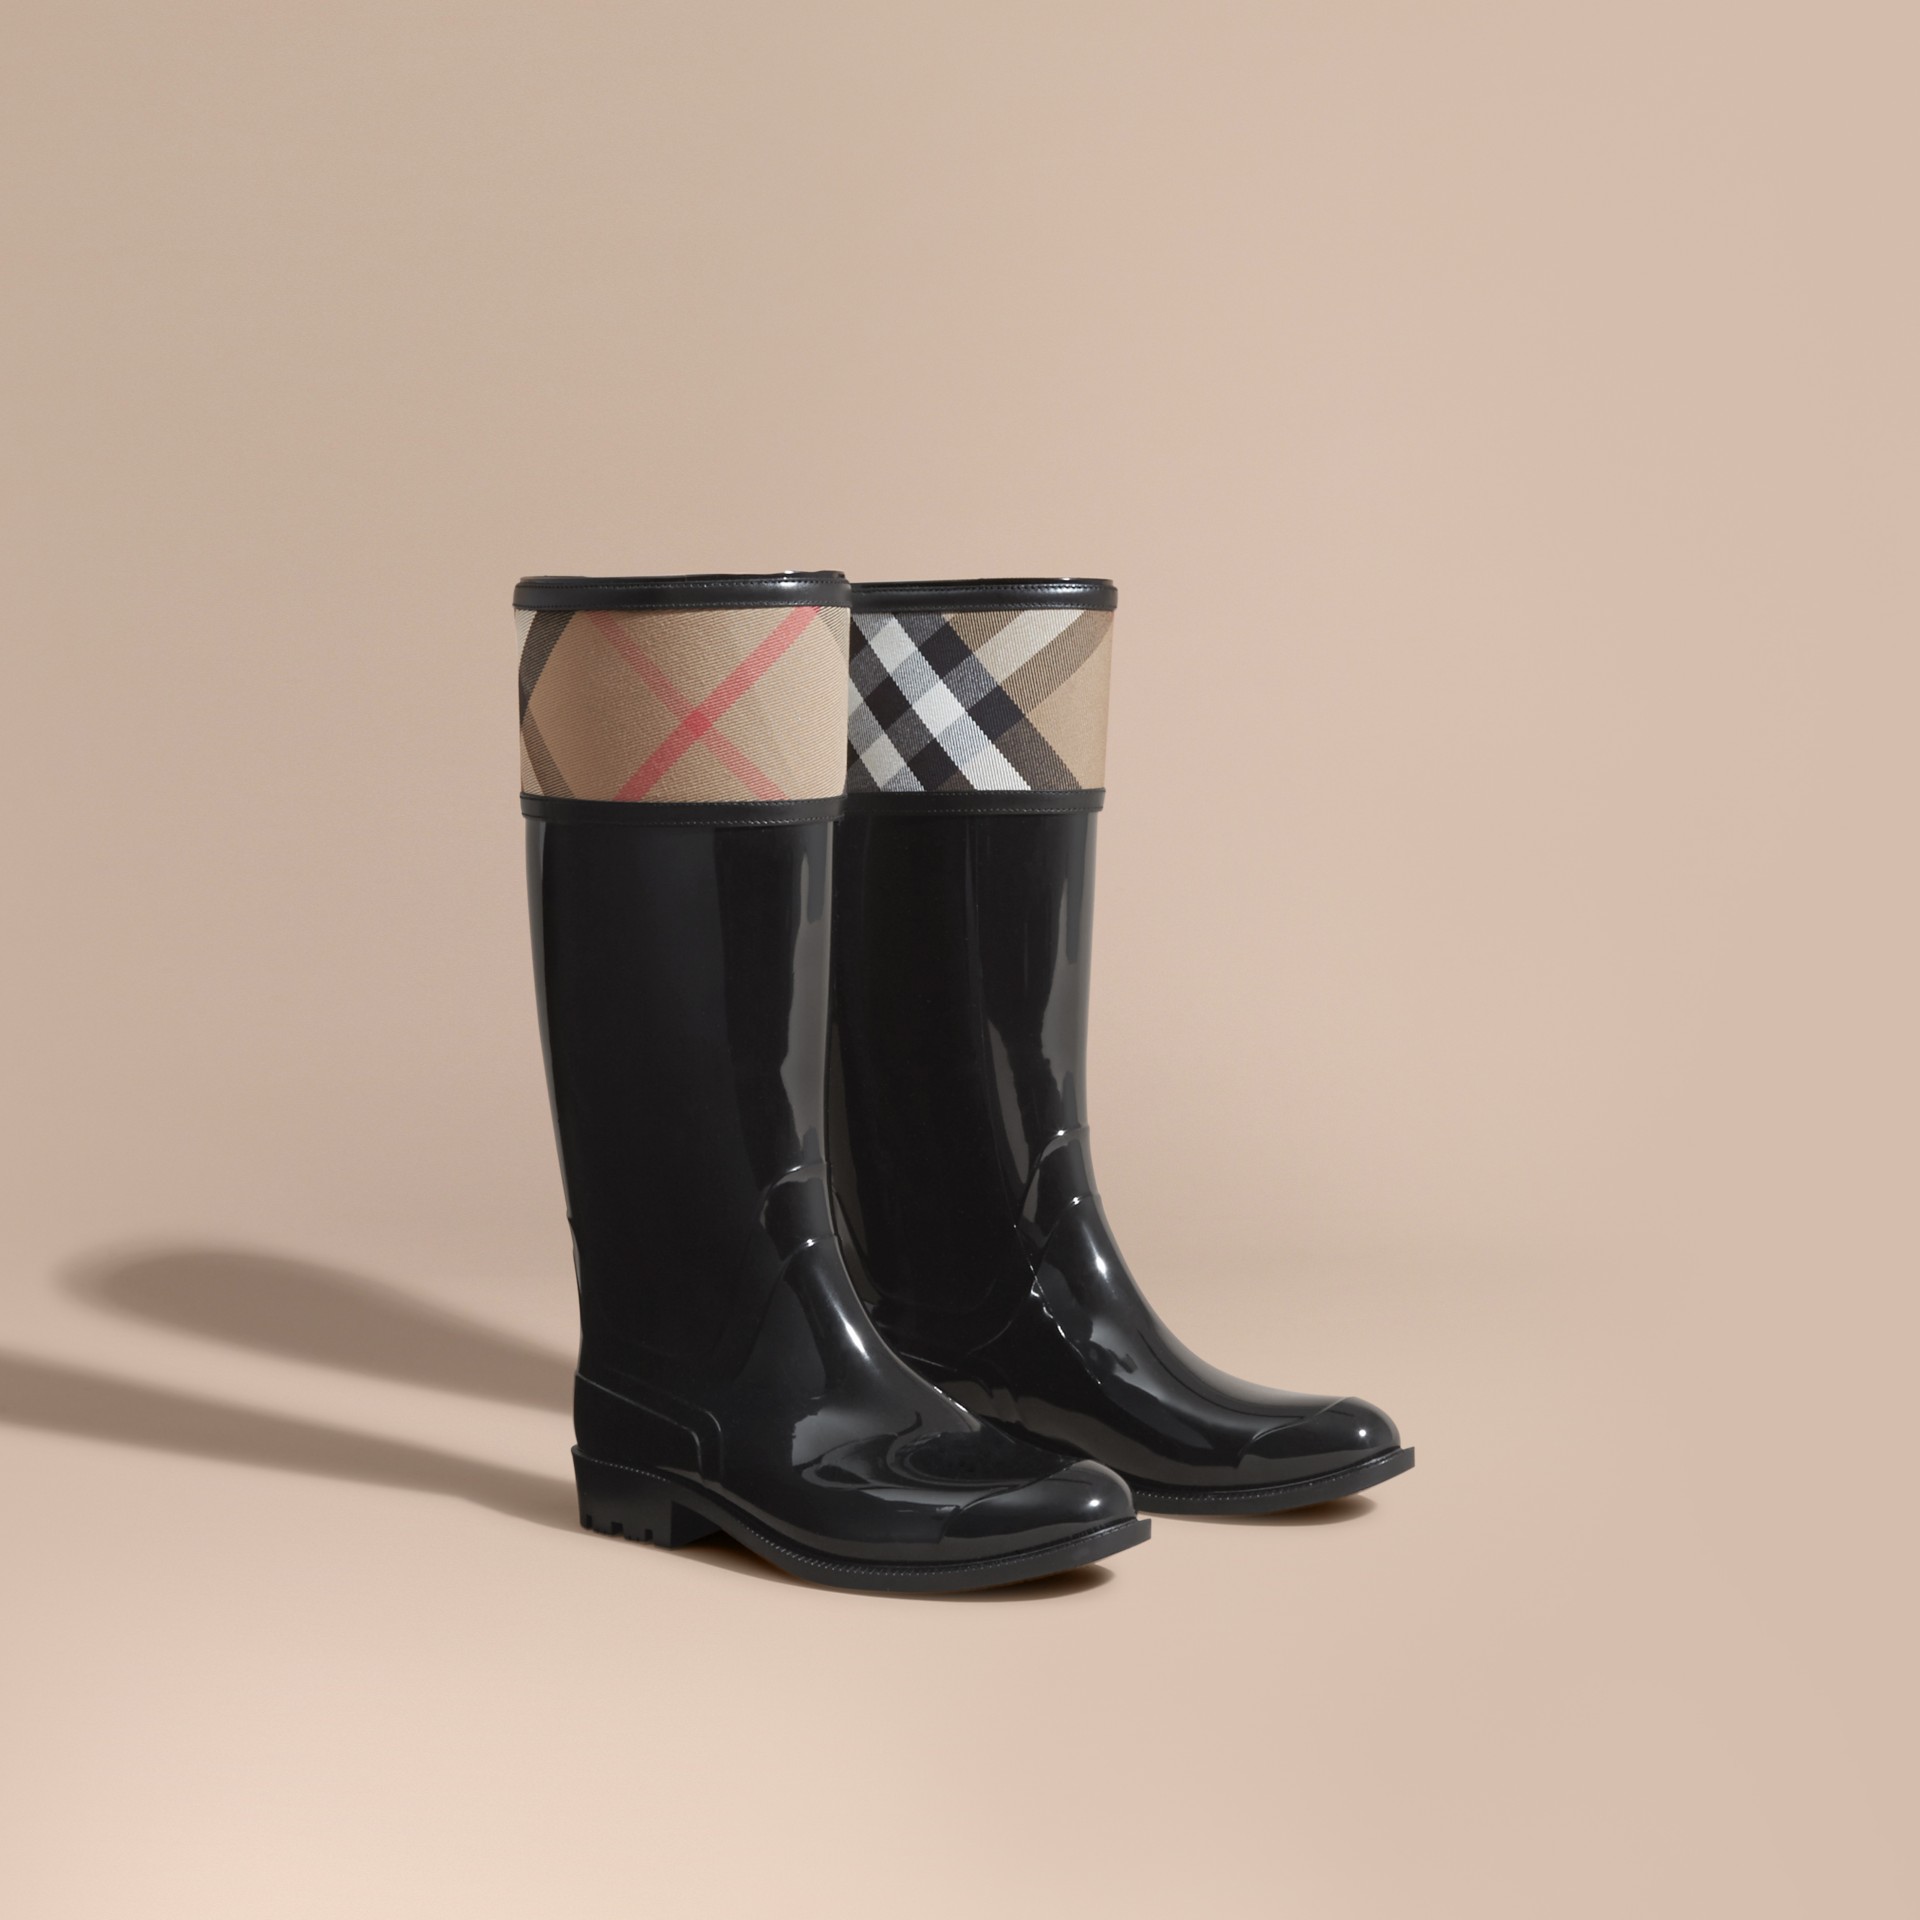 House Check Rain Boots in Black - Women | Burberry United States